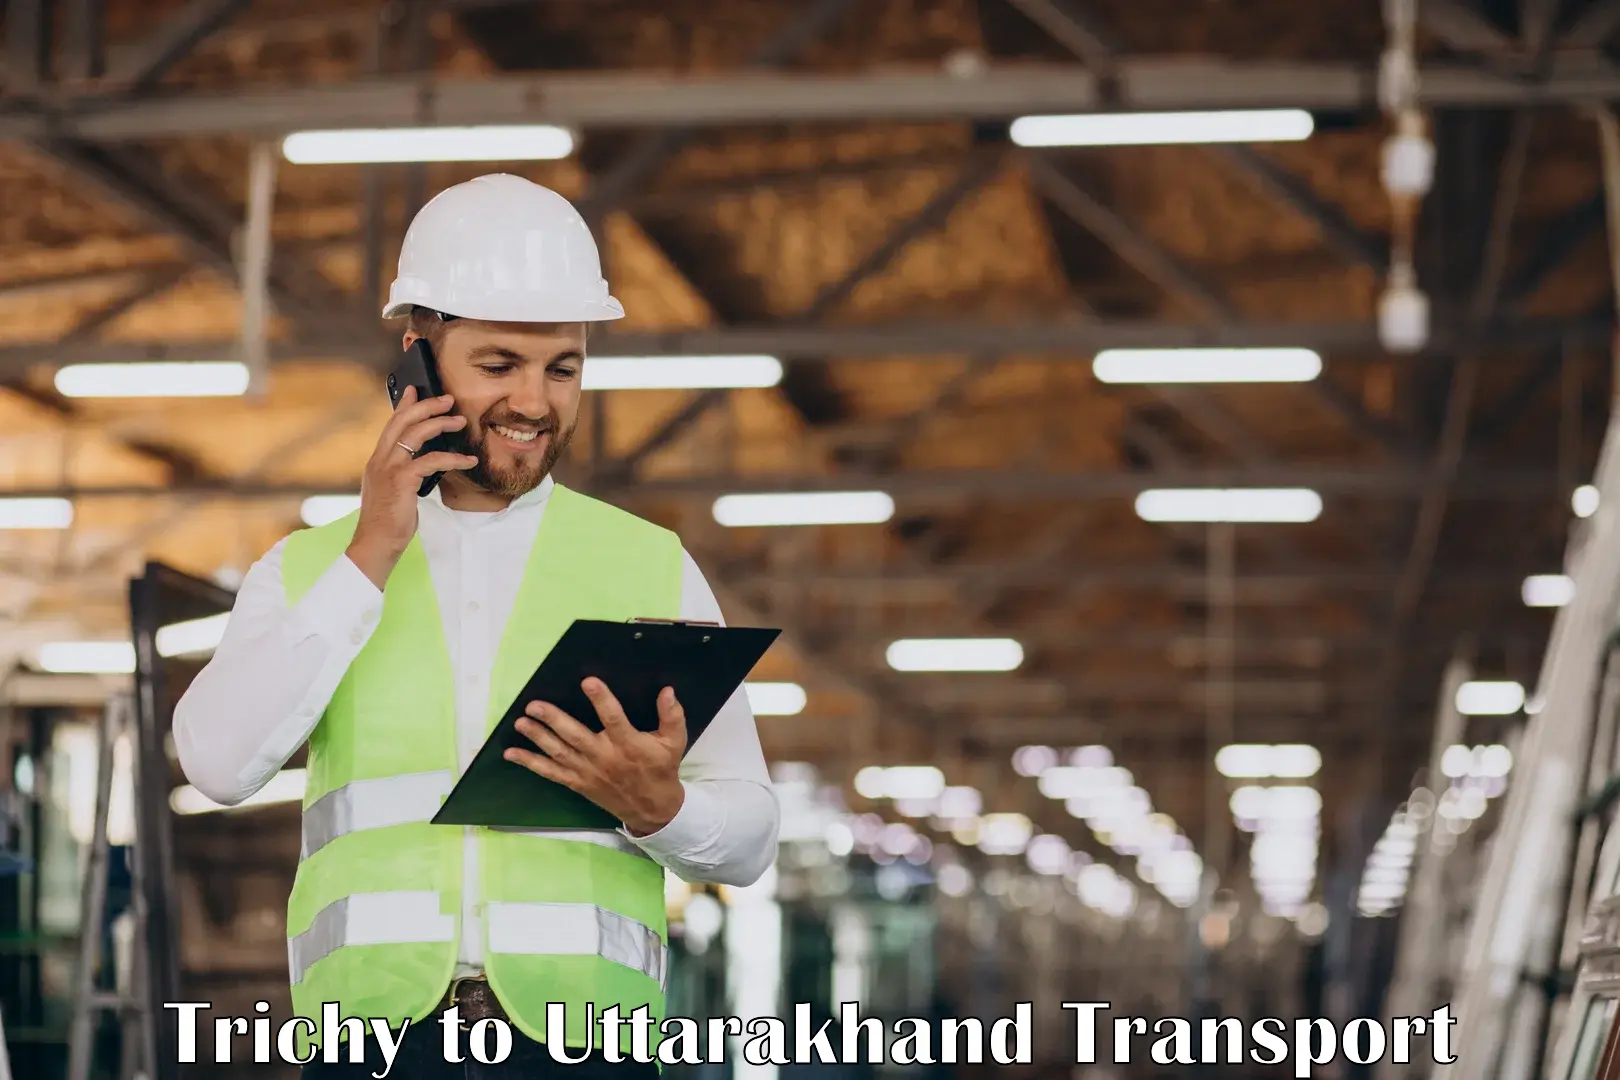 Commercial transport service Trichy to Uttarakhand